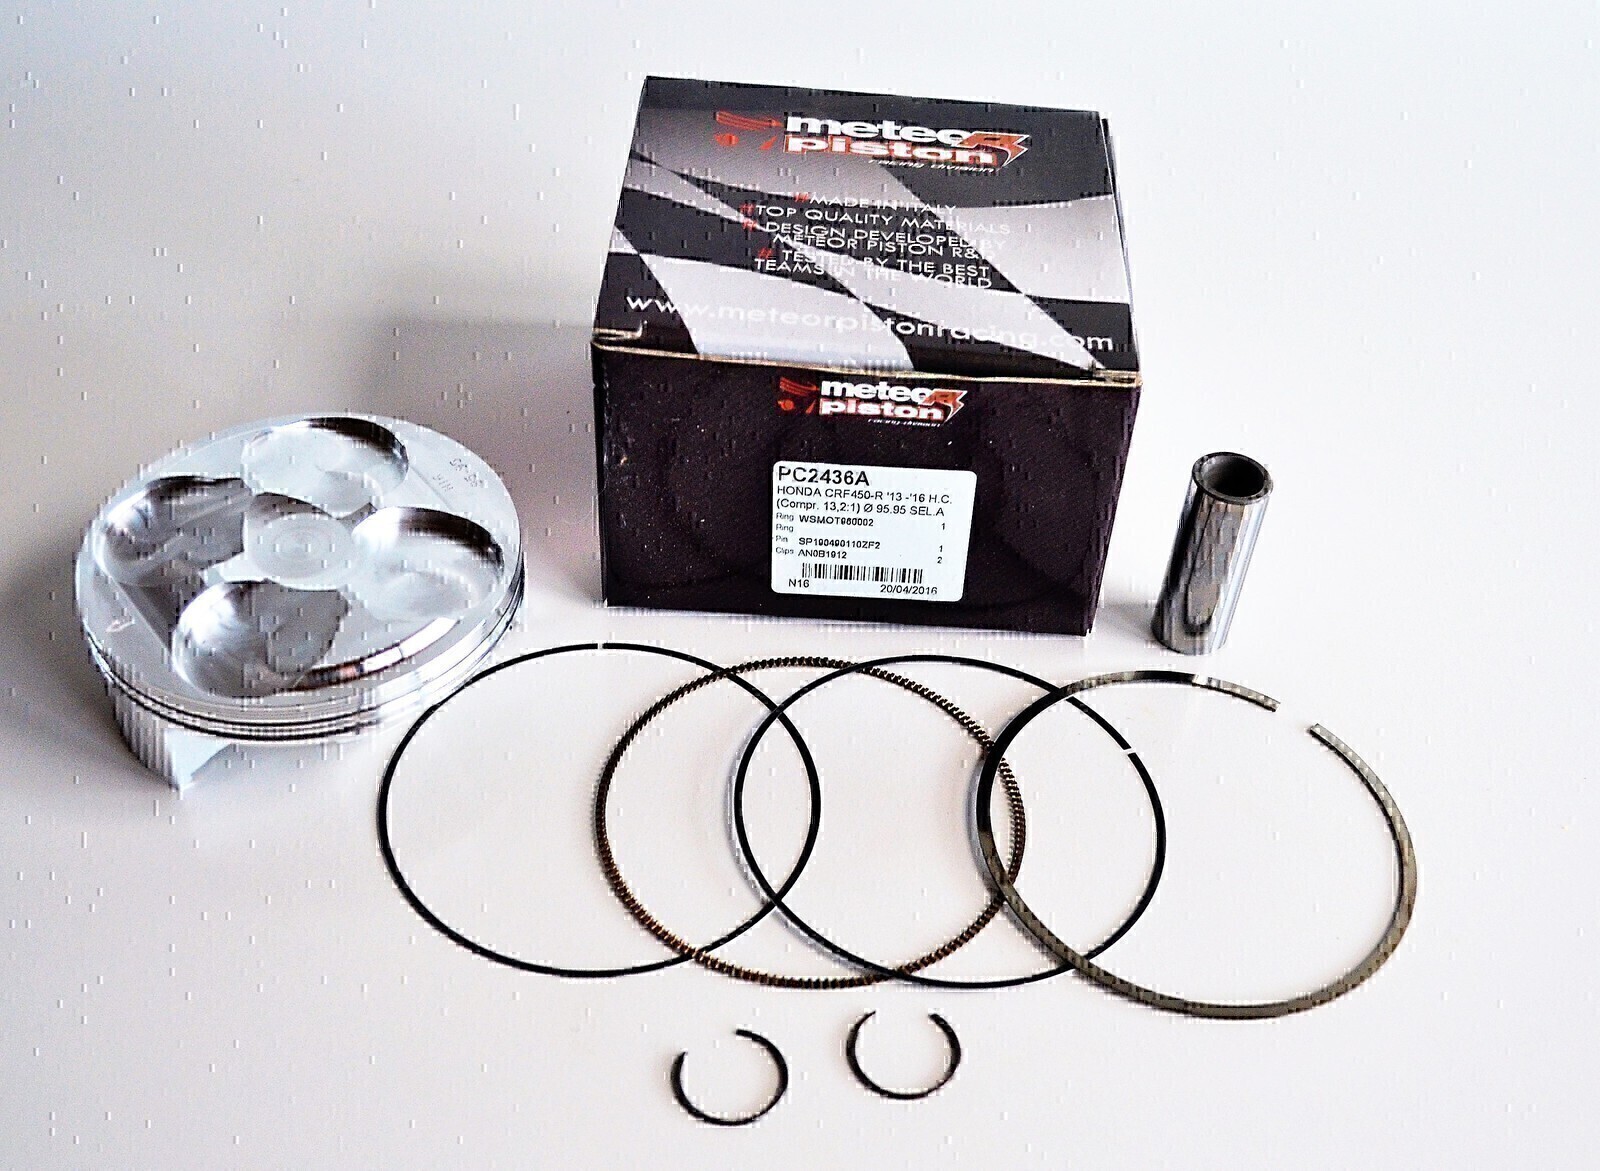 METEOR PISTON KIT FOR HONDA 4T CRF450R 2013 - 2016 HIGH COMP 13.2:1 95.95 SIZE.A